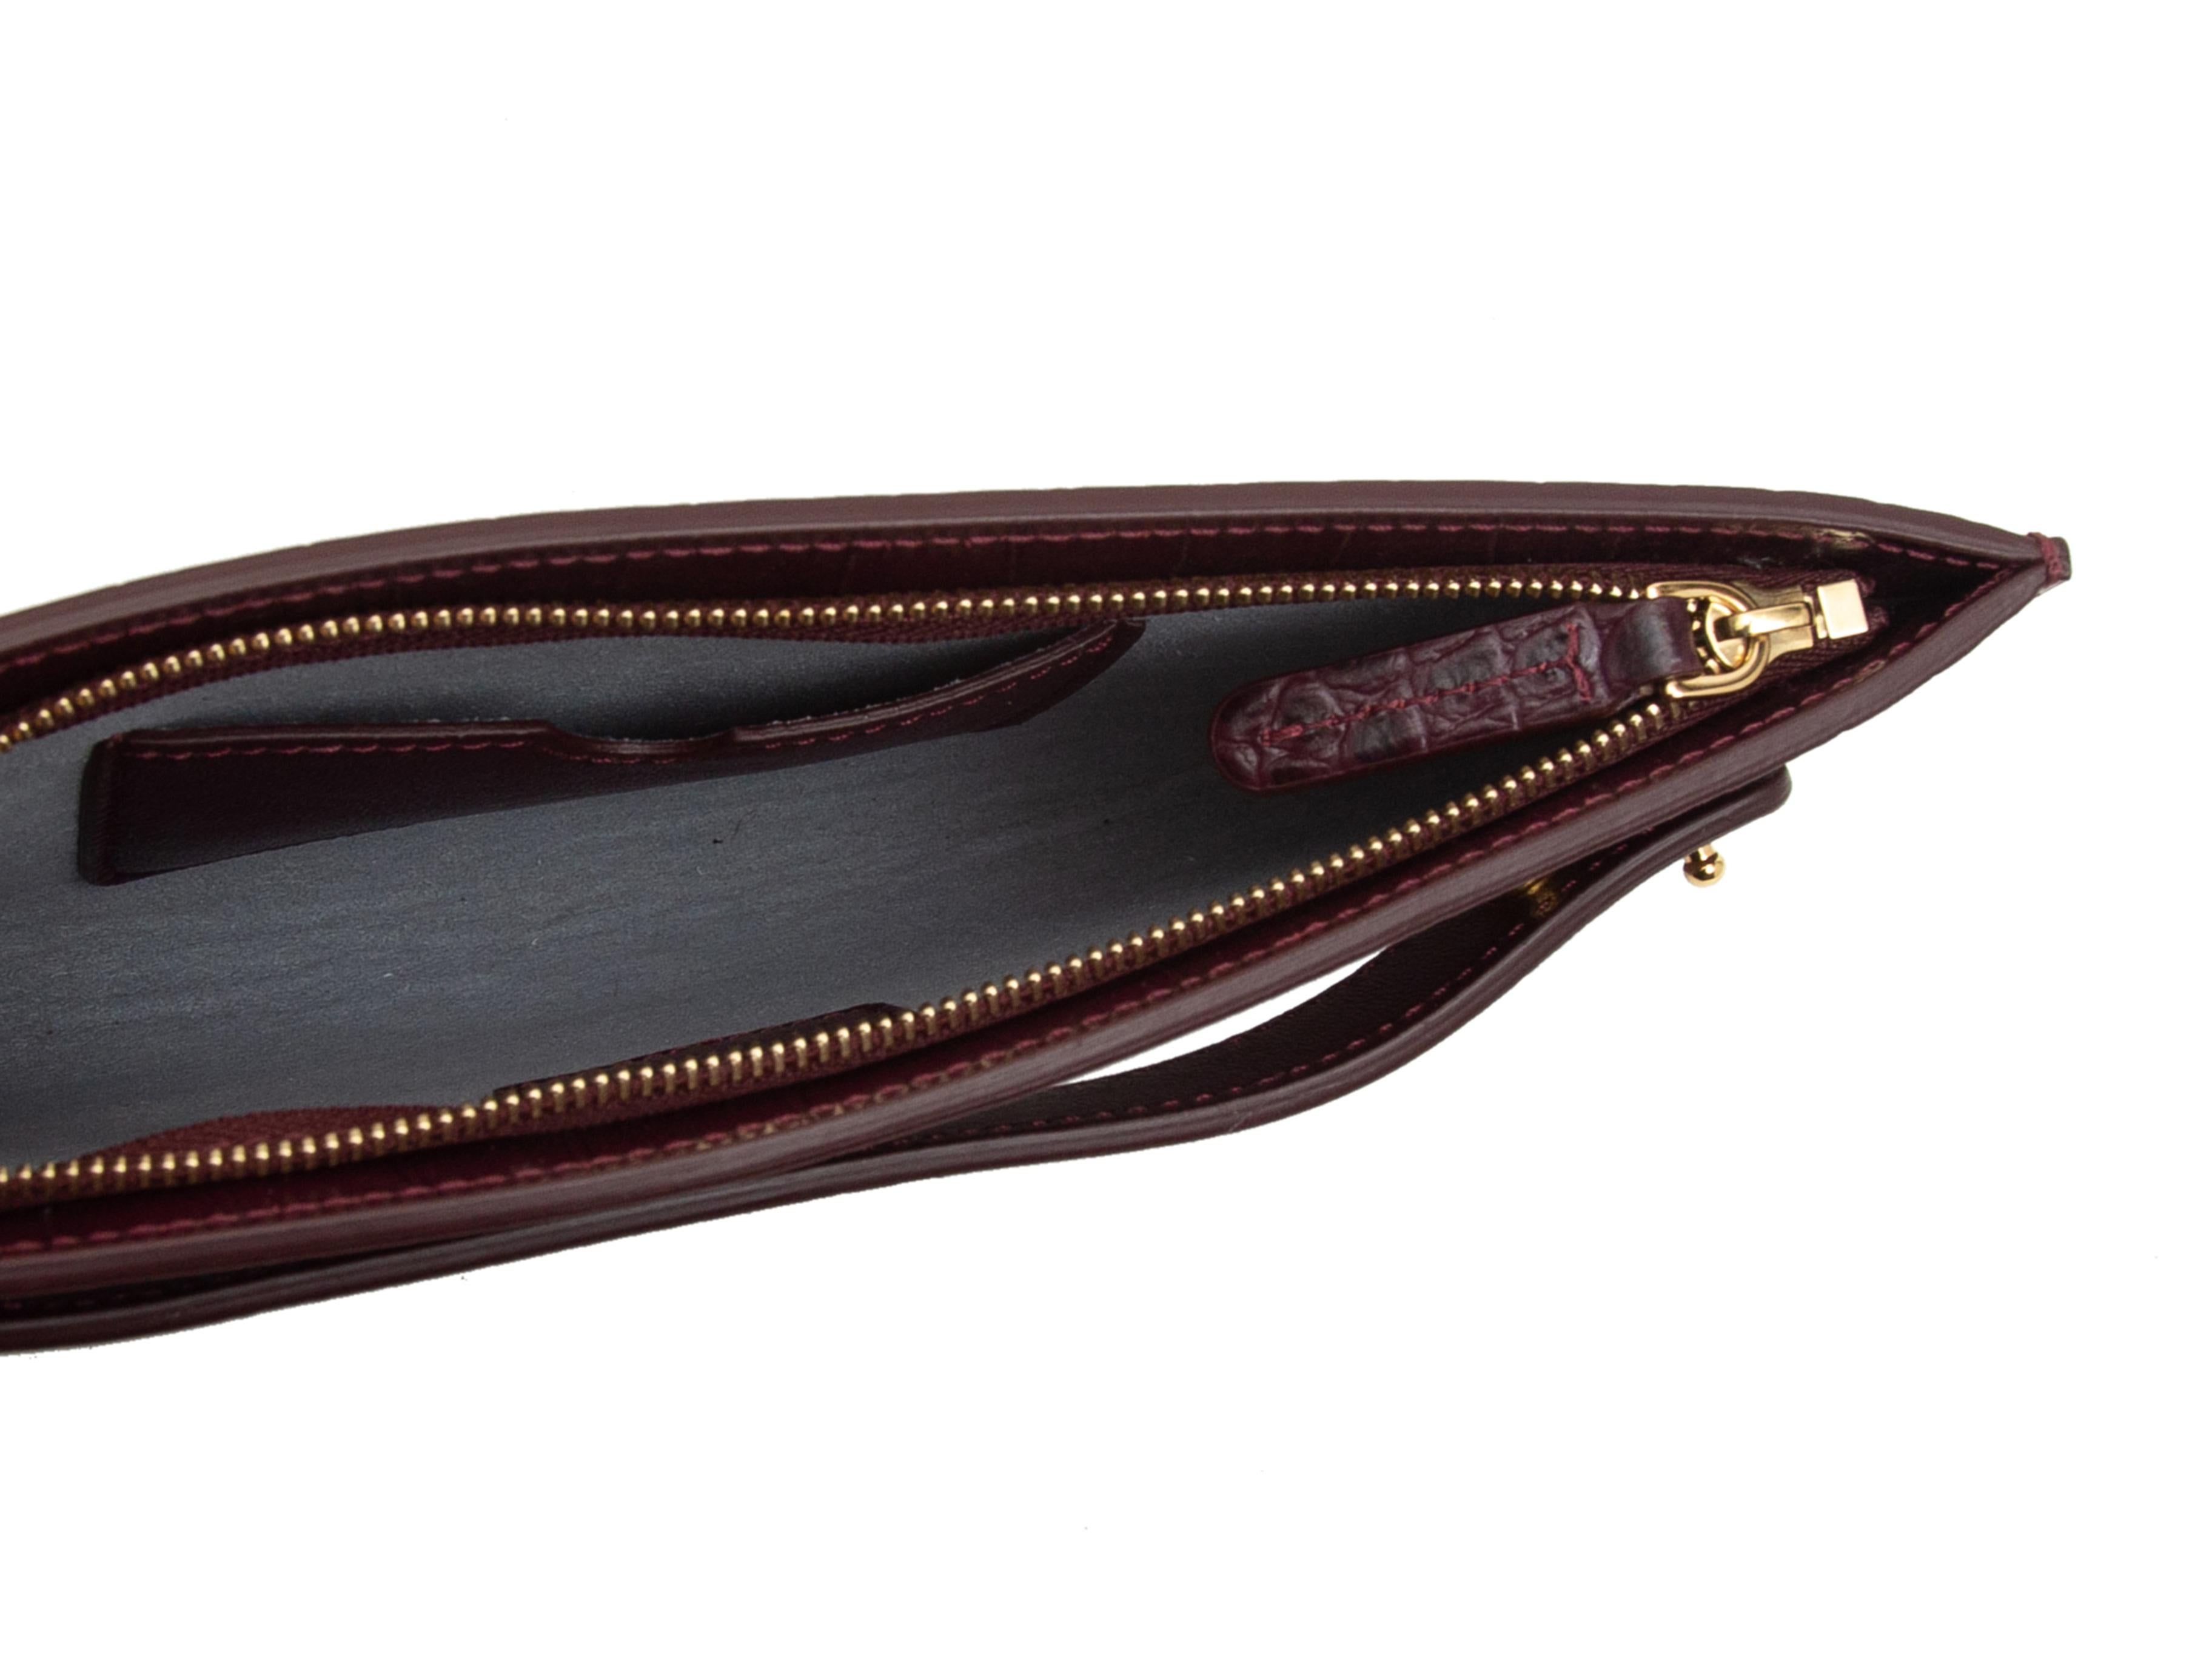 Product details: Burgundy 'Dragon' embossed leather Bracelet Pouch by Senreve. Gold-tone hardware. Zip closure at top. 4.75